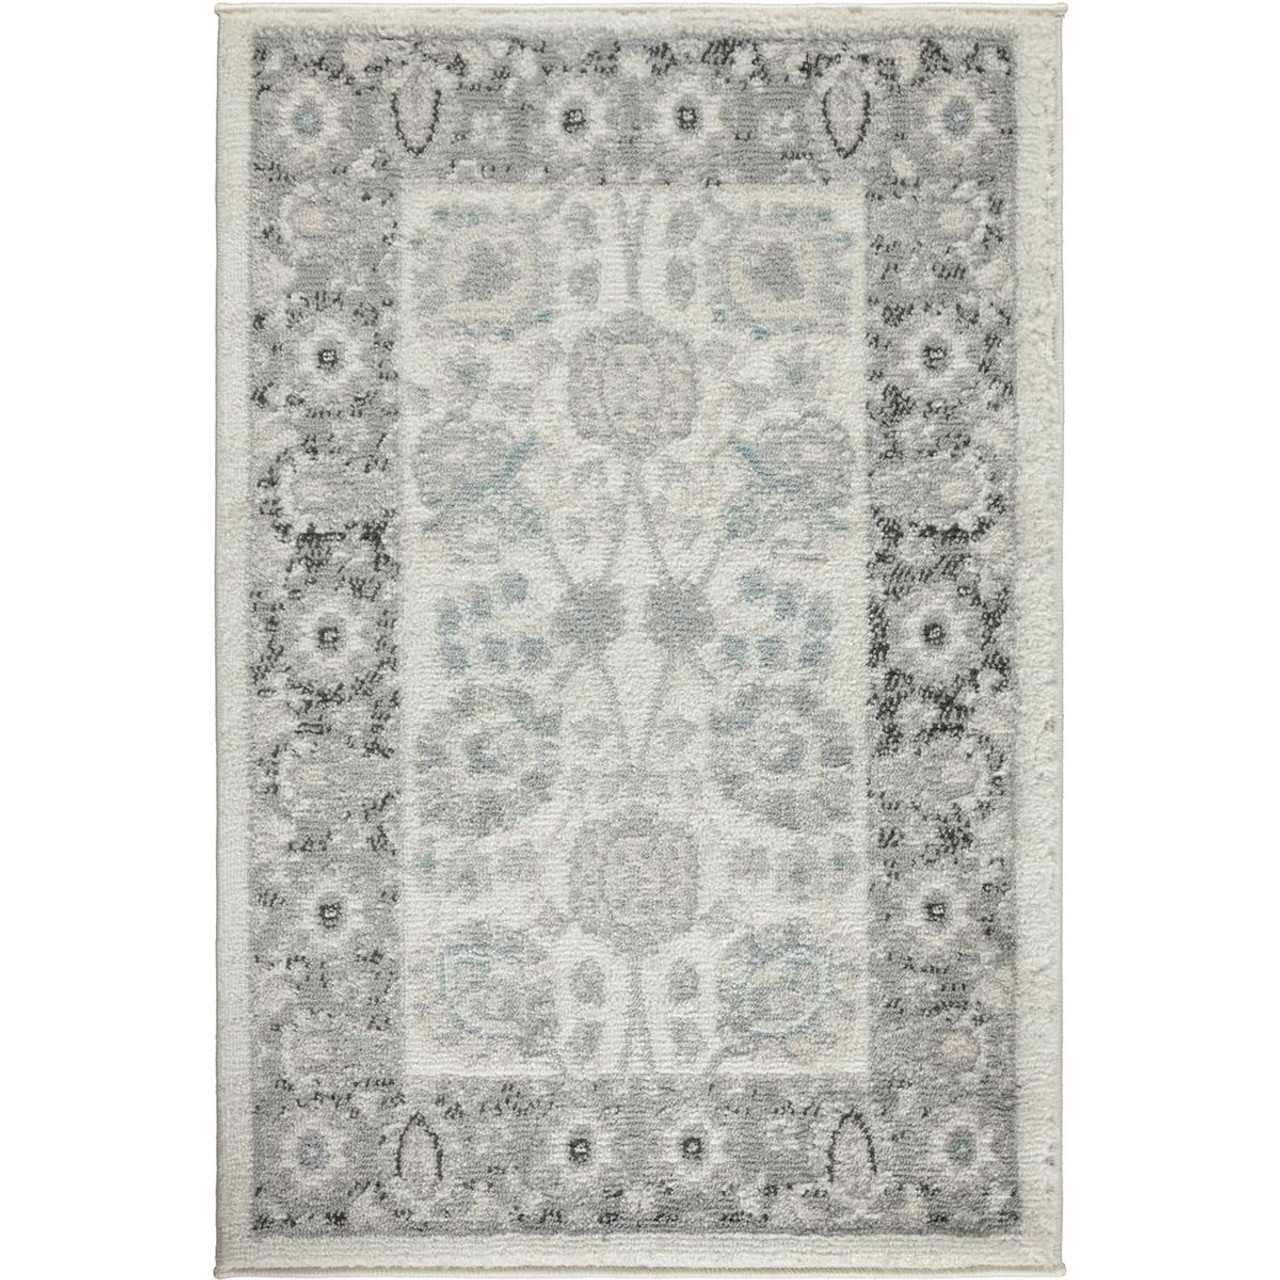 2 x 3-Foot Rectangular Contemporary Gray Accent Rug product image